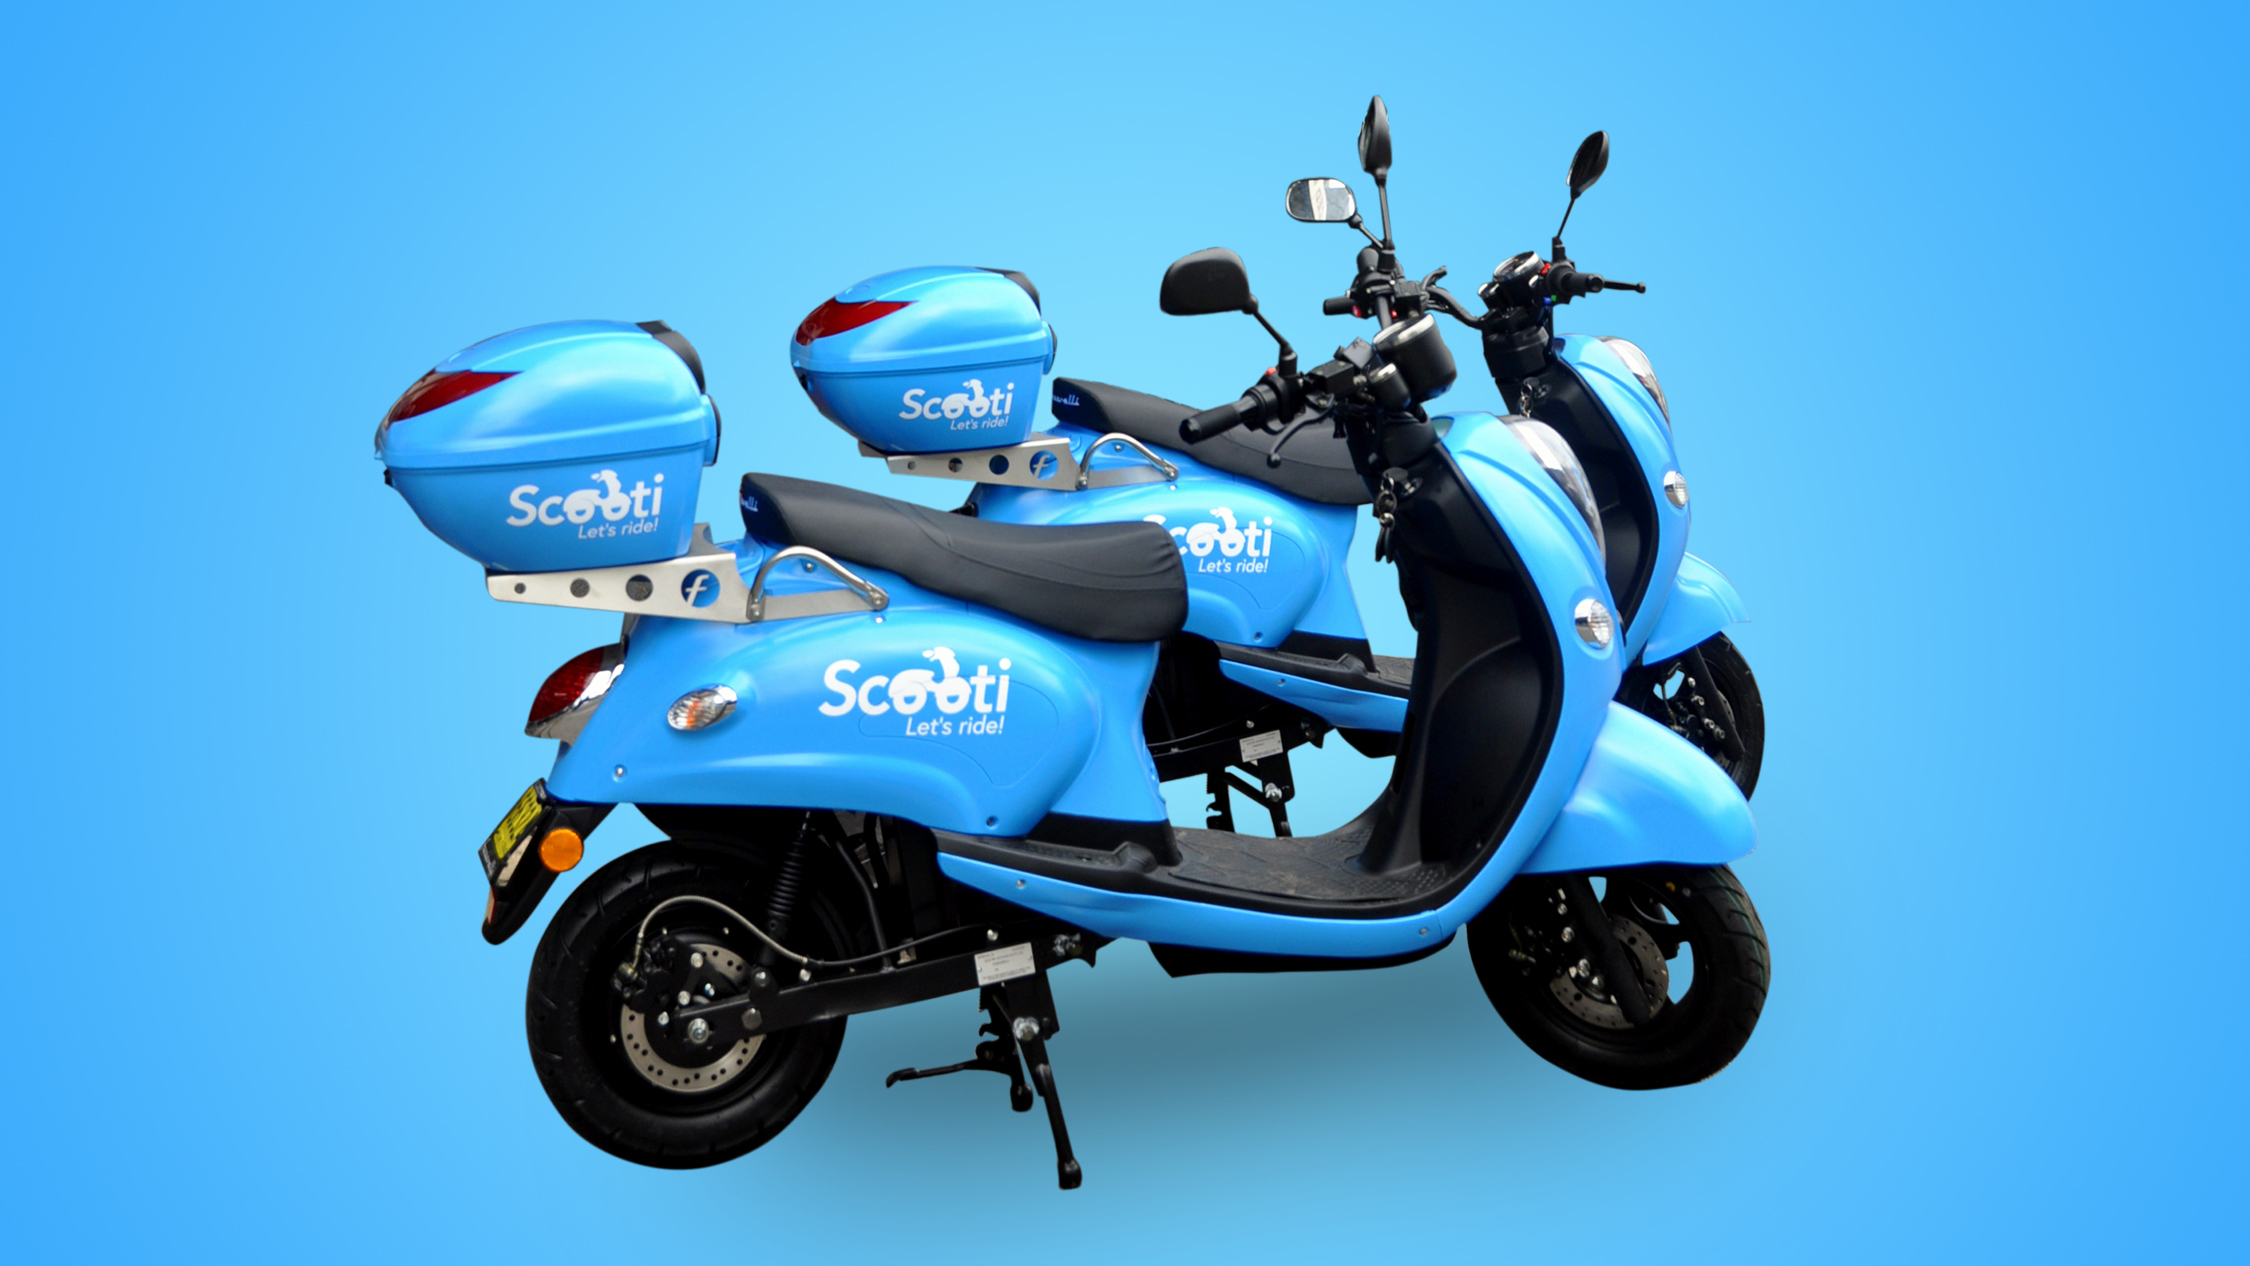 Scooter taxi service Melbourne